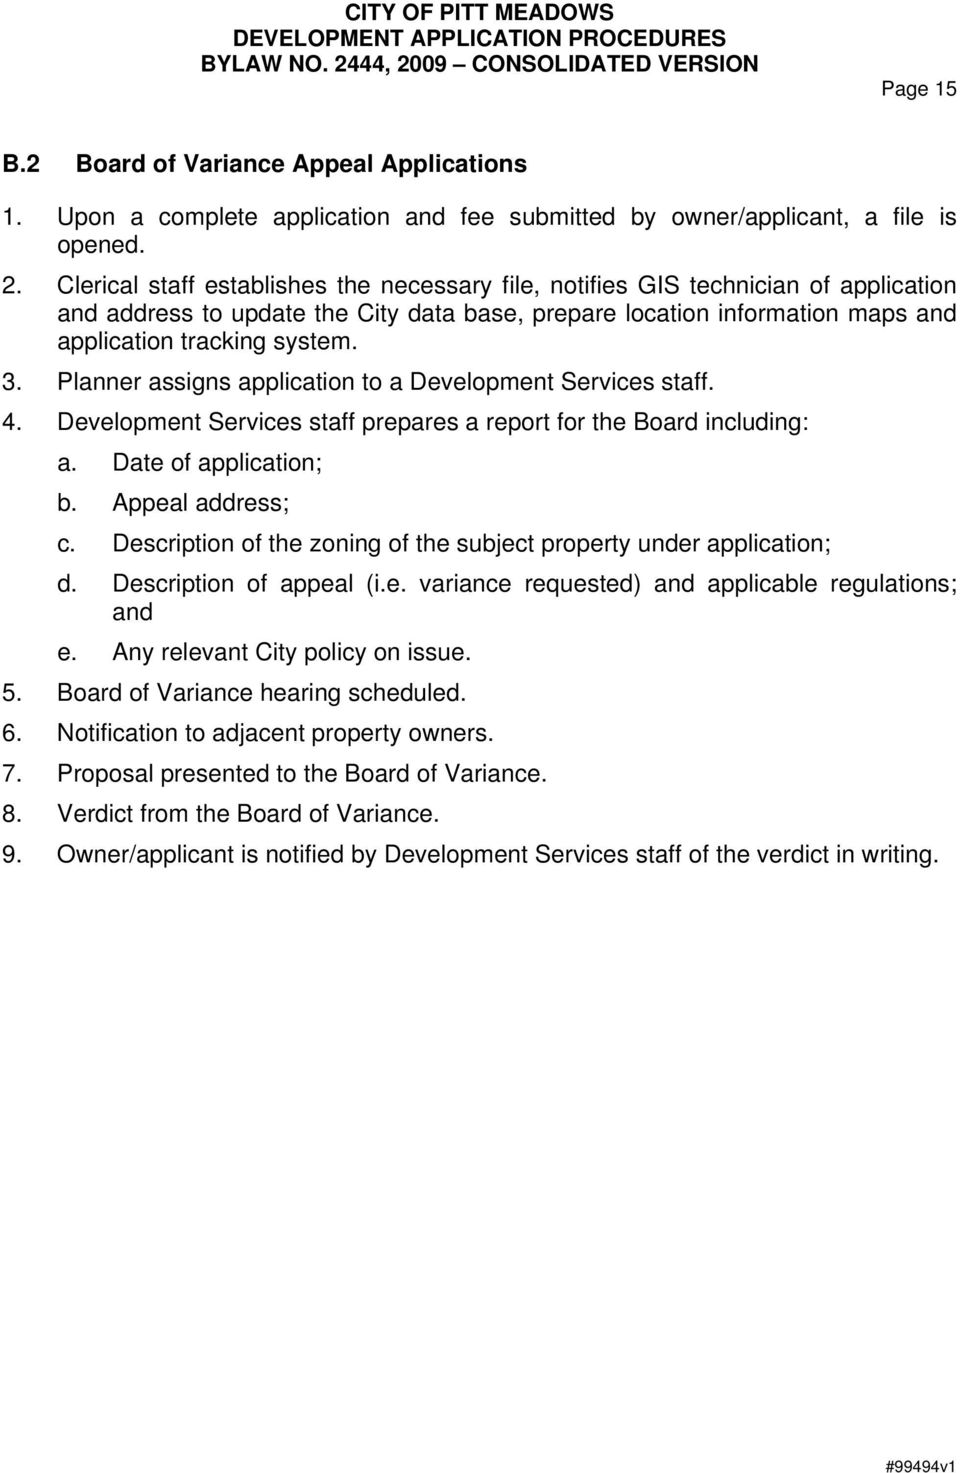 Planner assigns application to a Development Services staff. 4. Development Services staff prepares a report for the Board including: a. Date of application; b. Appeal address; c.